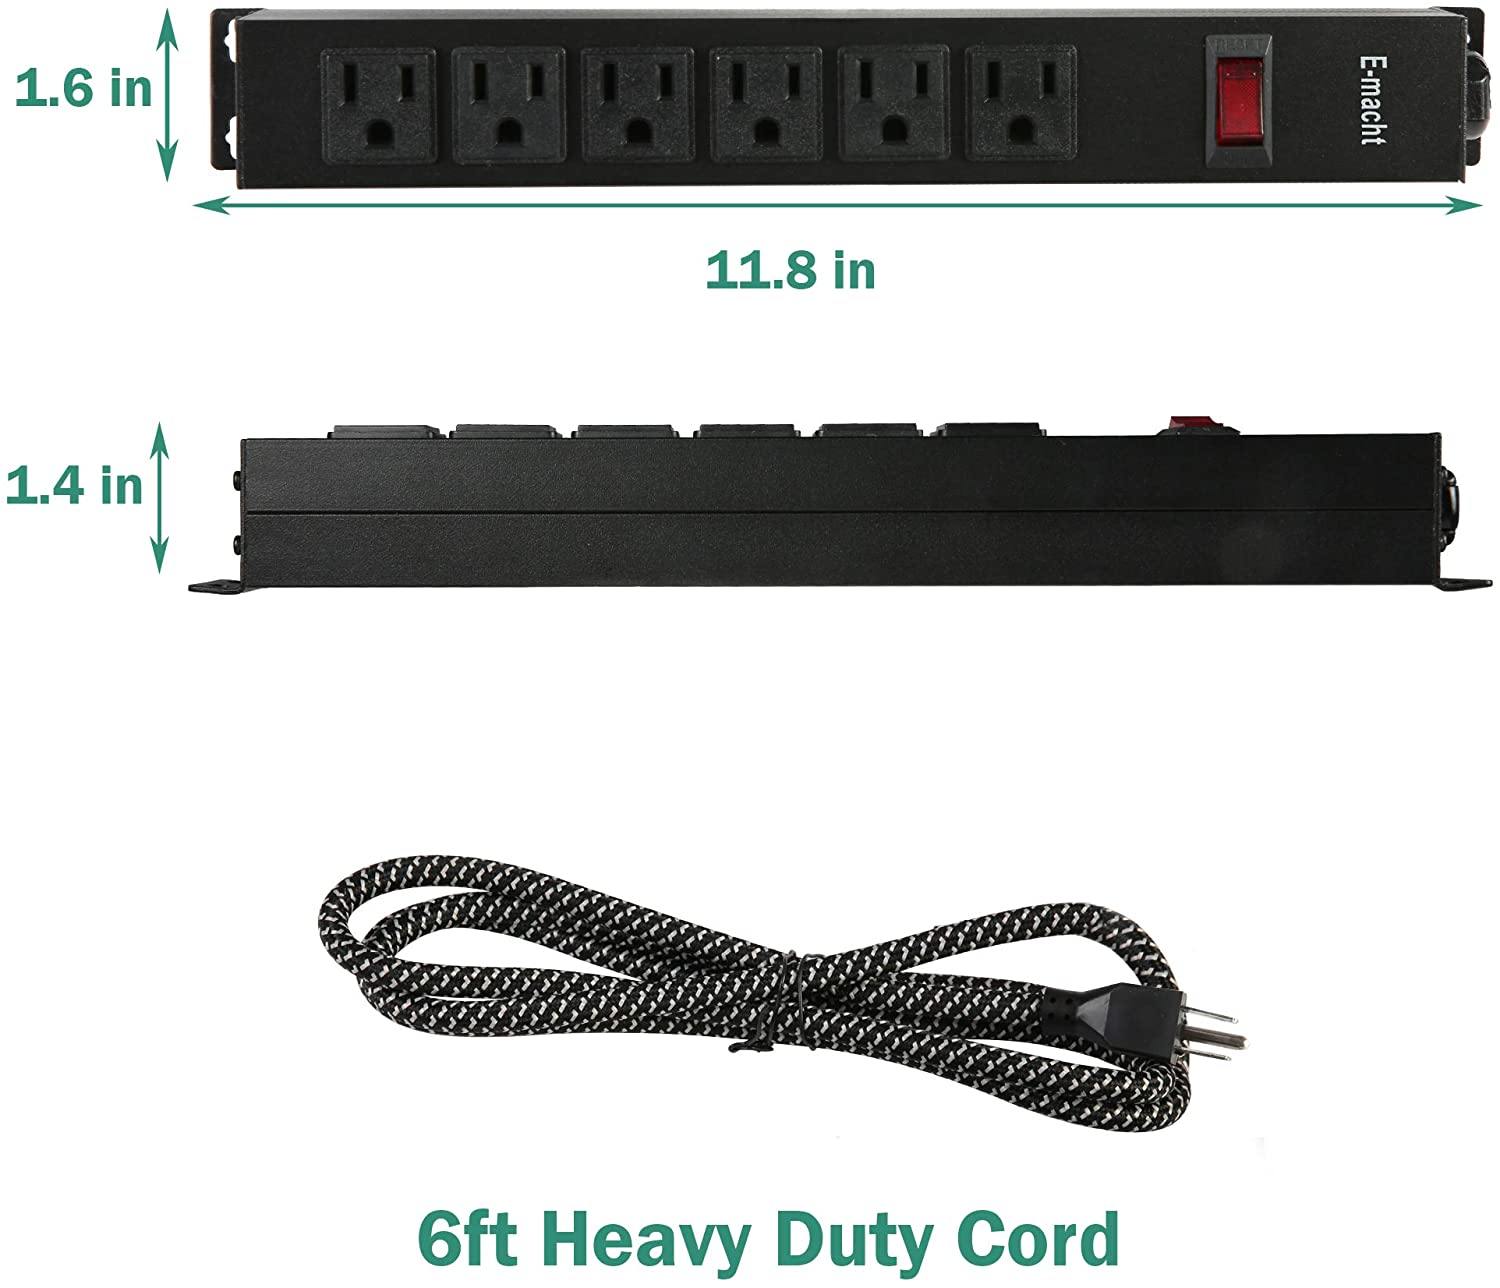 Long Power Strip Surge Protector, 6 Outlets Metal Heavy Duty Power Outlet, Wall Mountable, 6 ft Long Extension Cord, 2 Pack, Black - Bosonshop